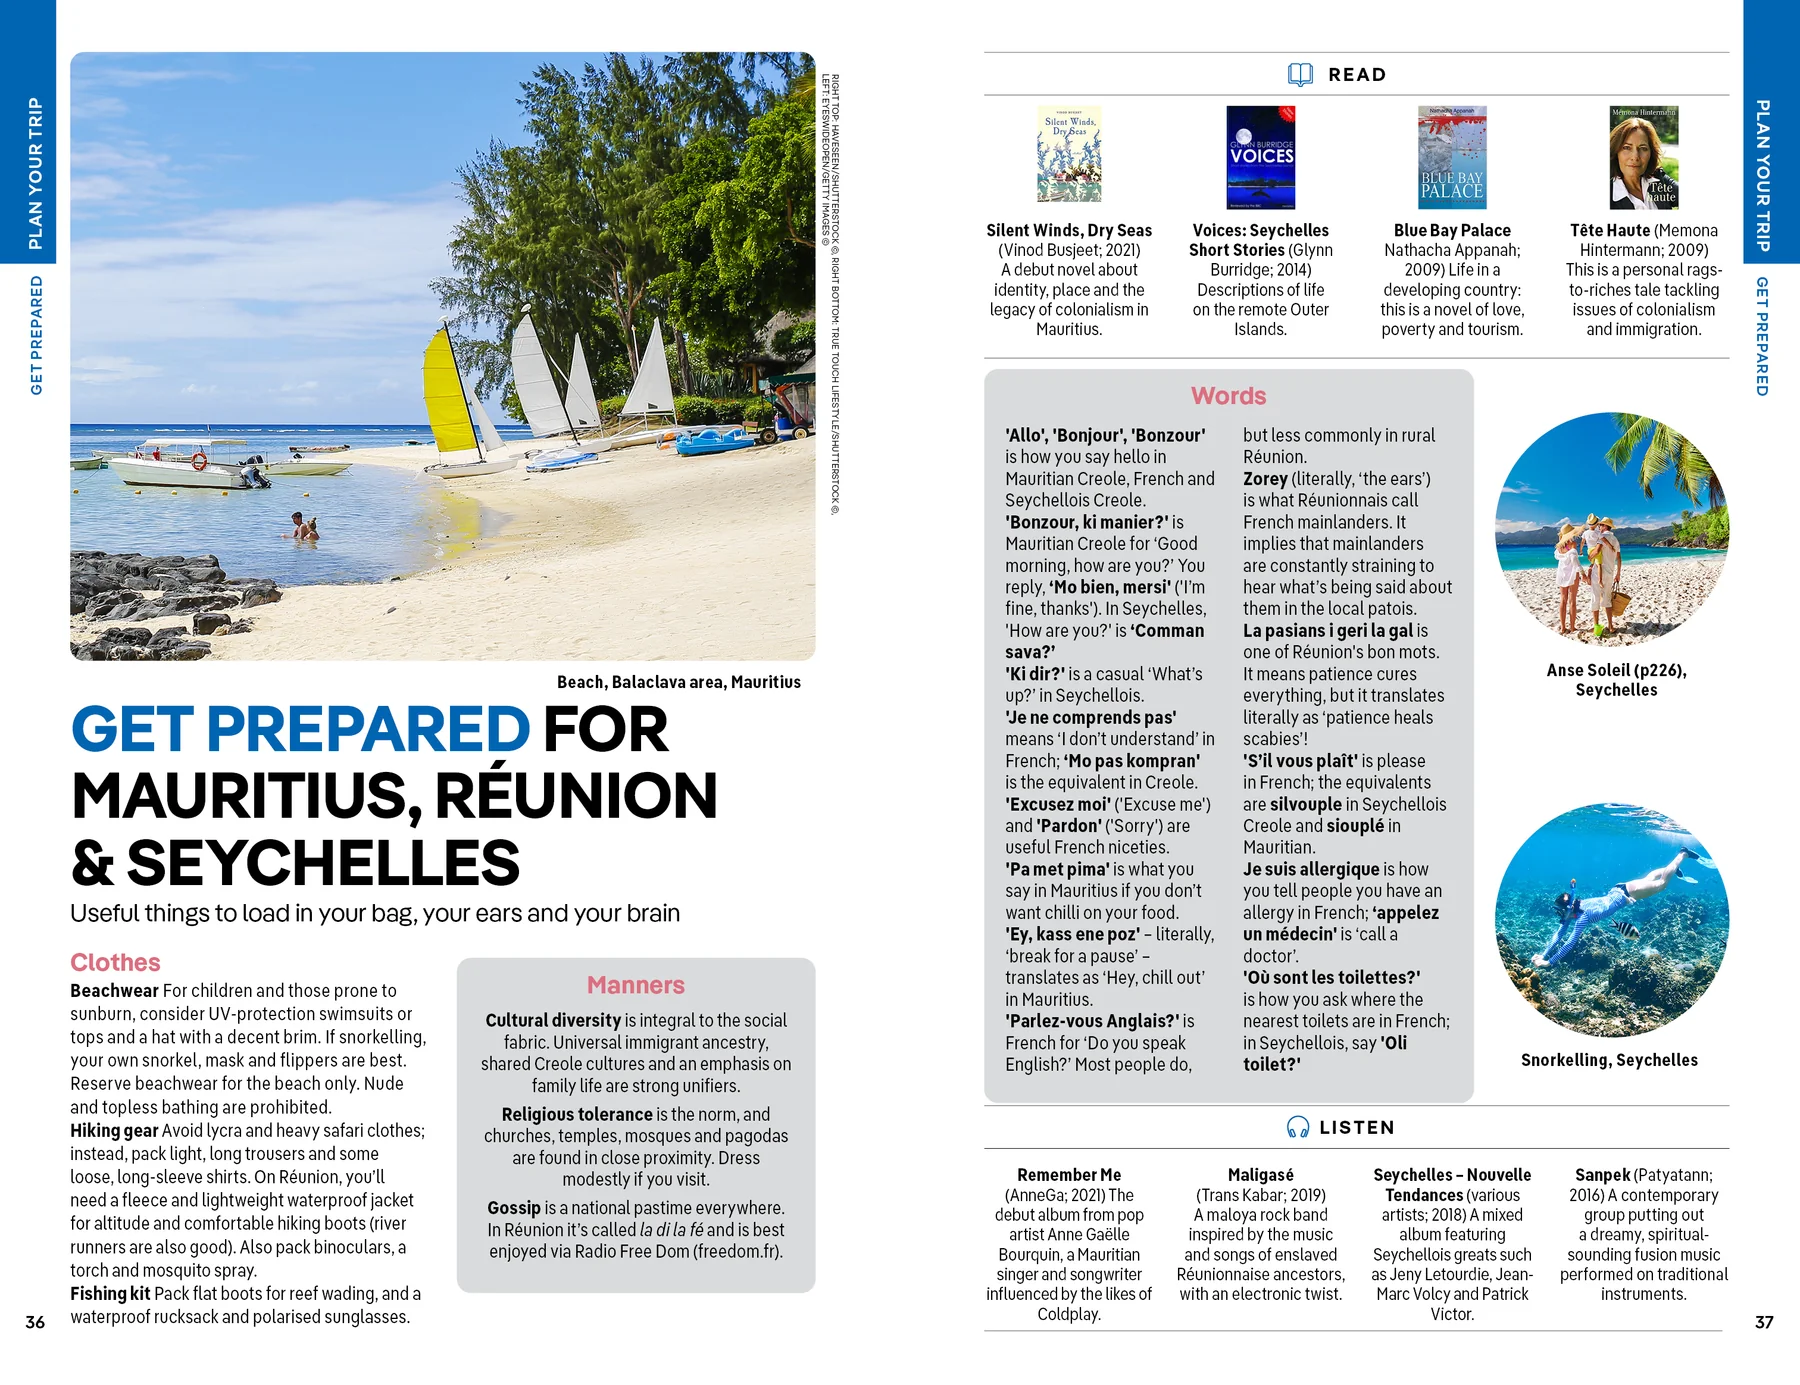 Mauritius, Reunion & Seychelles Lonely Planet